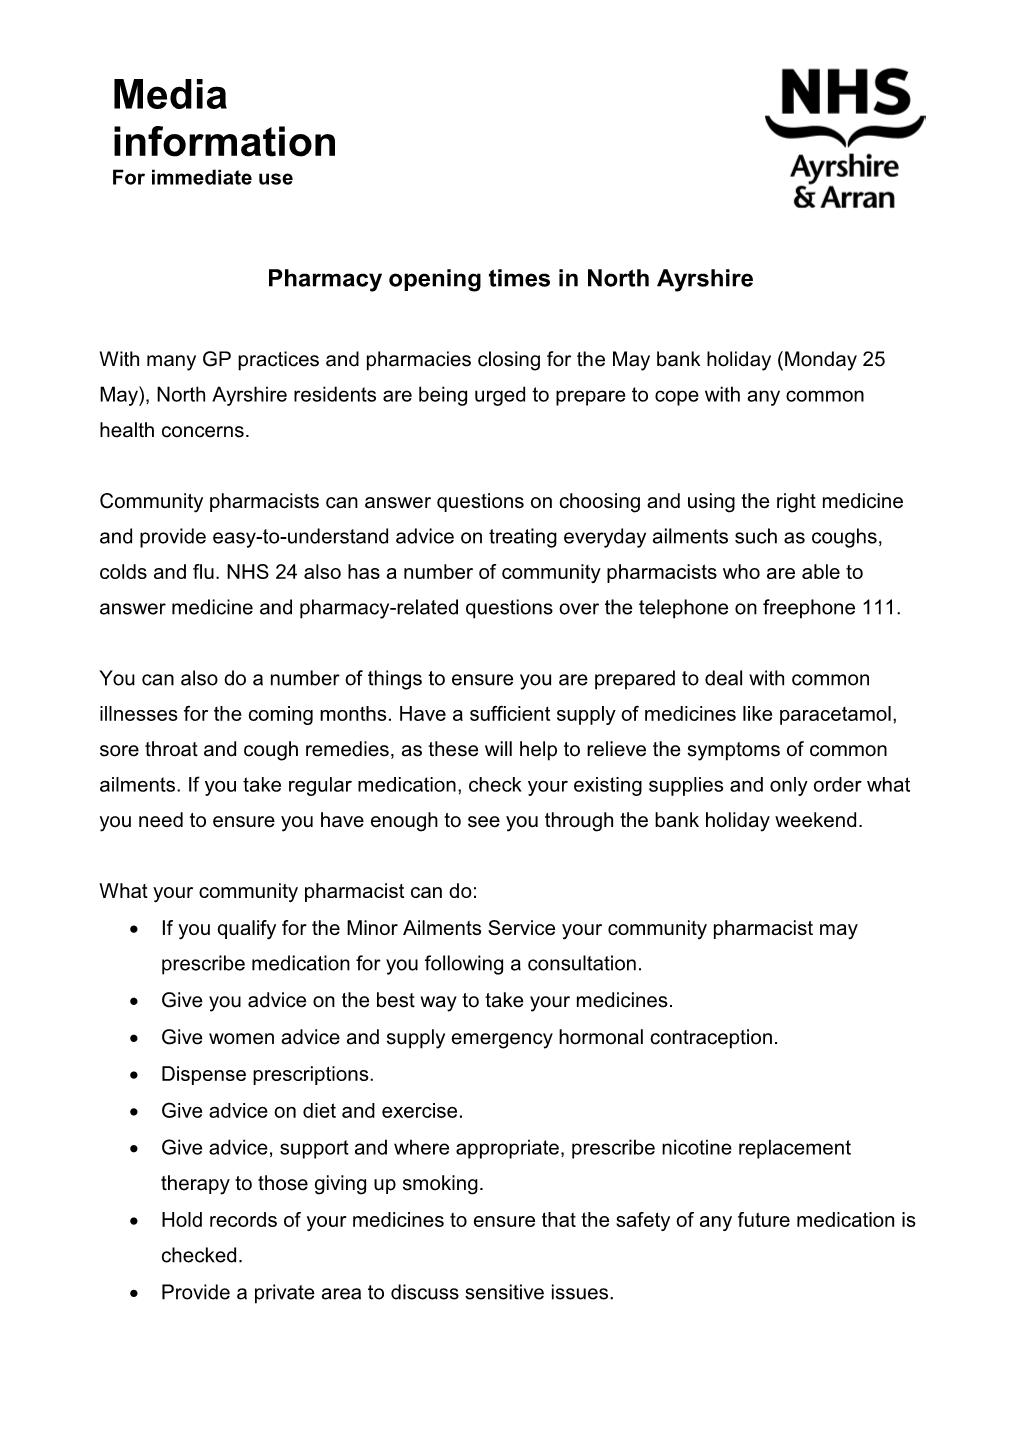 Pharmacy Opening Times in North Ayrshire